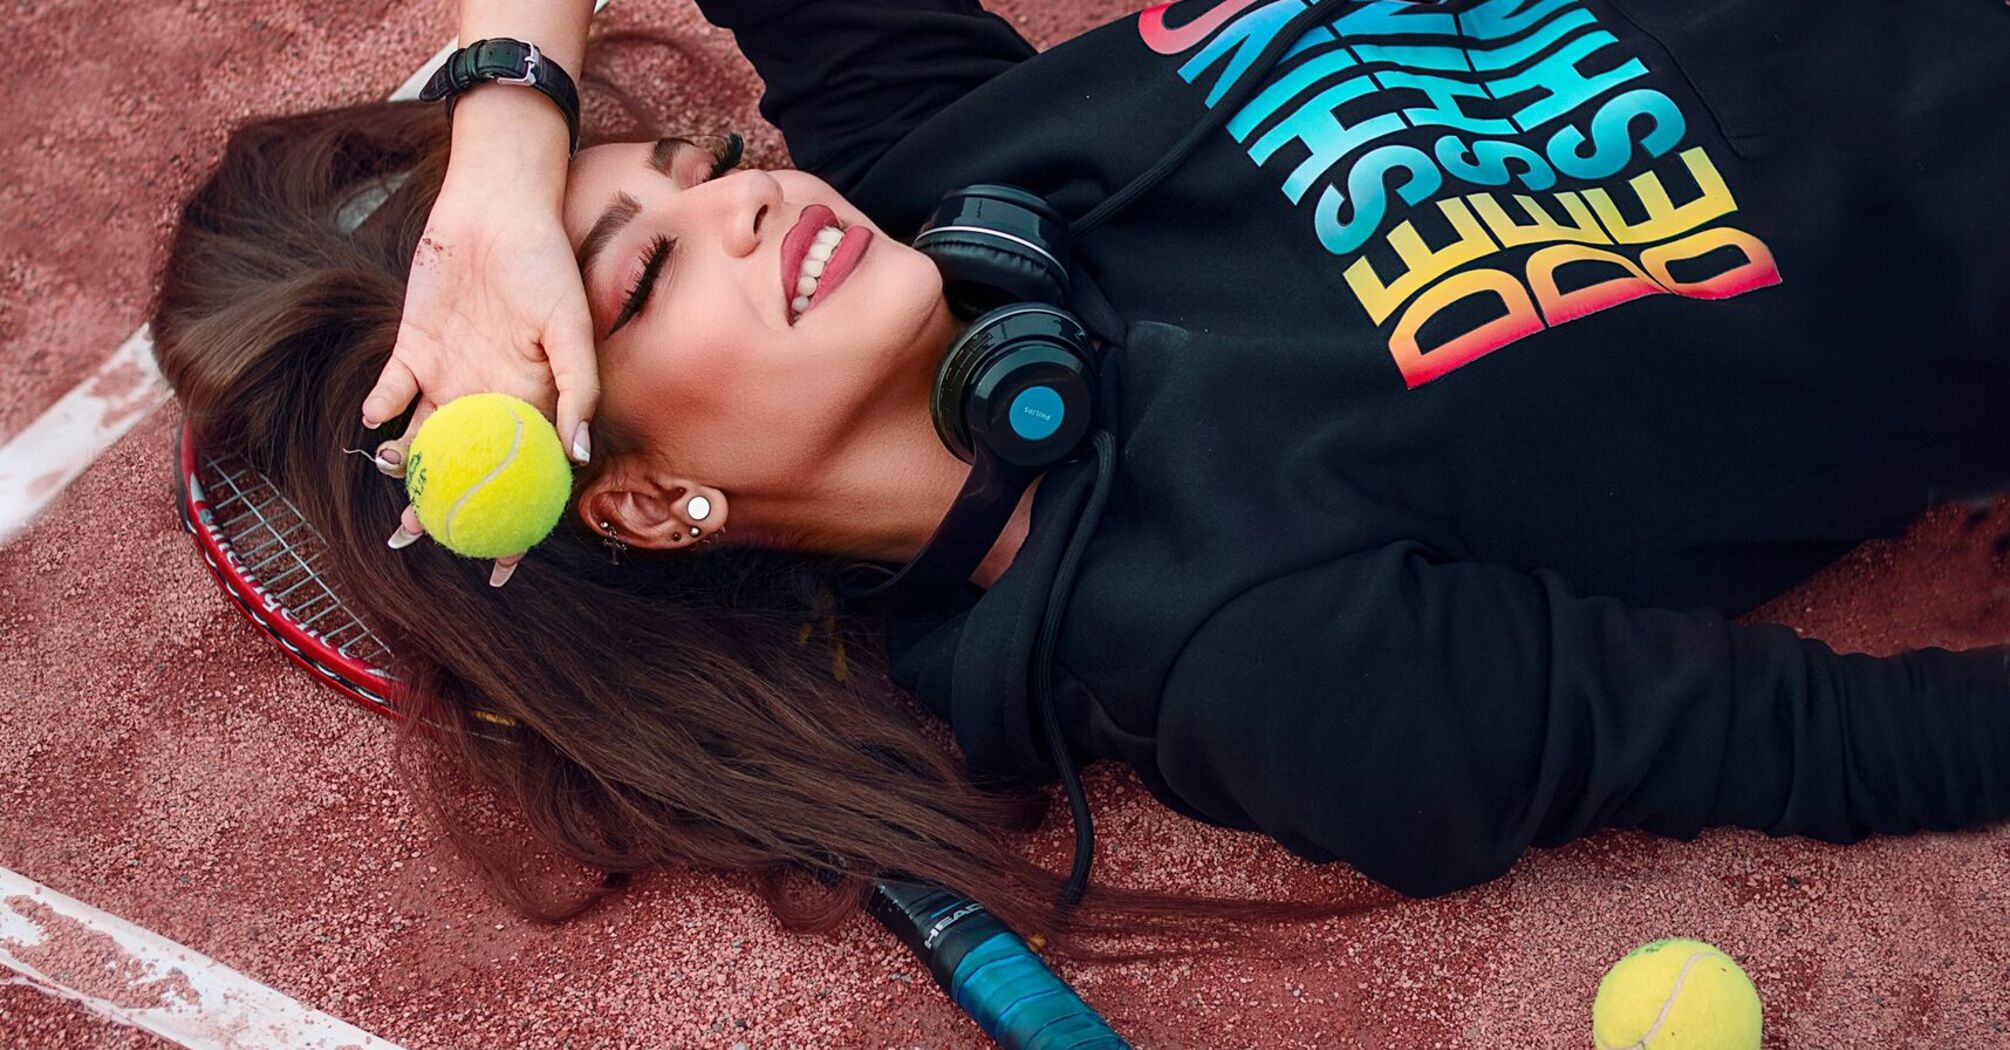 A woman lying on a clay tennis court with a tennis ball pressed against her forehead, a racket beside her, and headphones around her neck